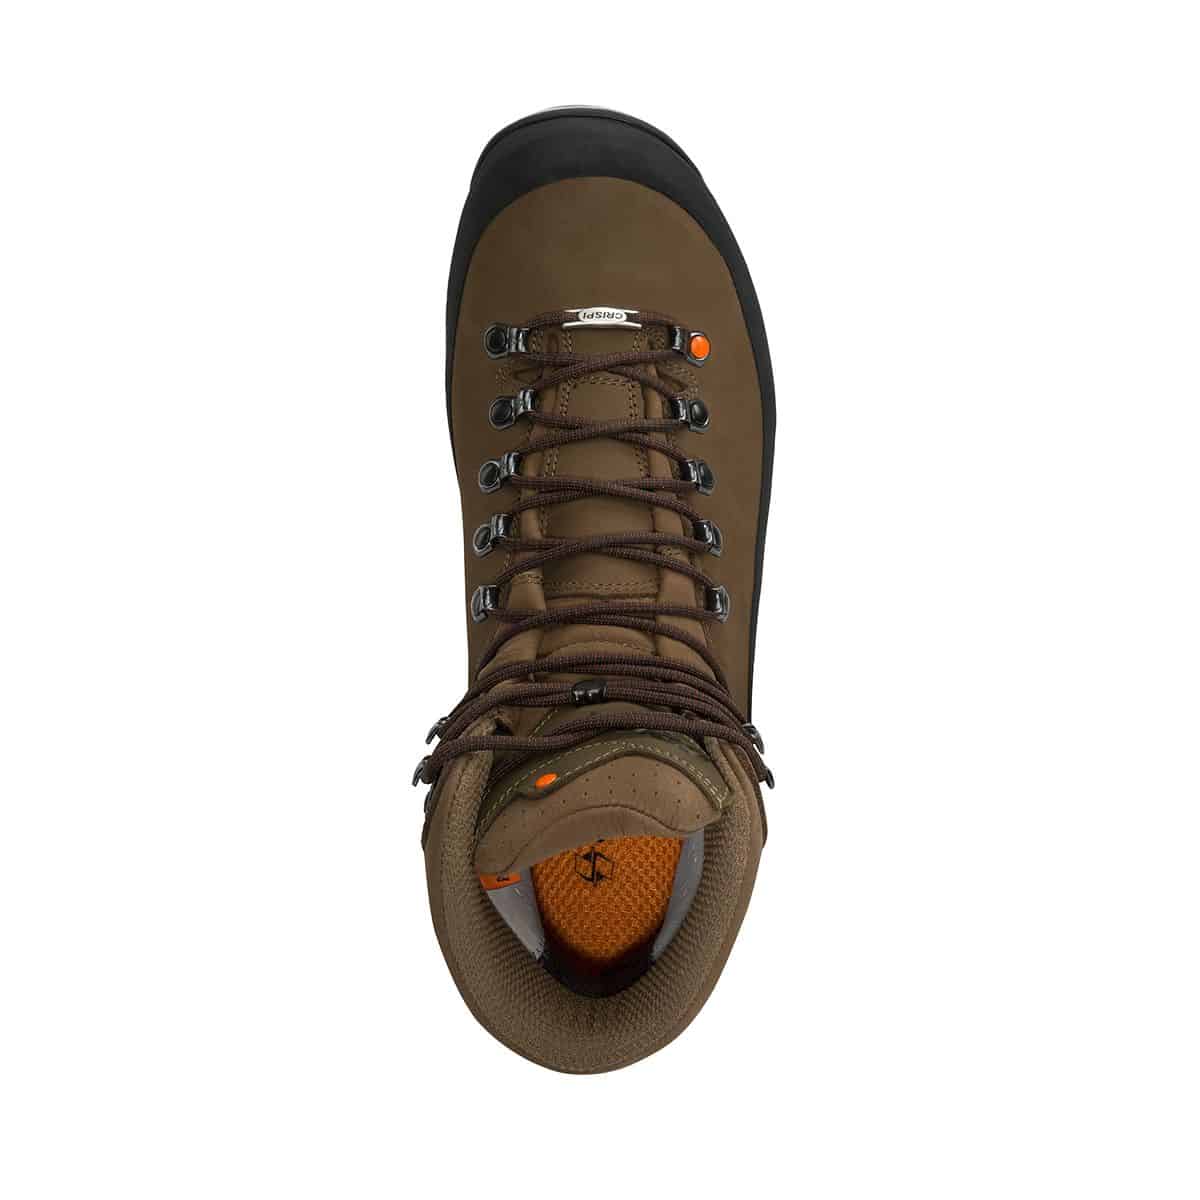 Crispi Boots Nevada - Non Insulated Hunting Boot Top